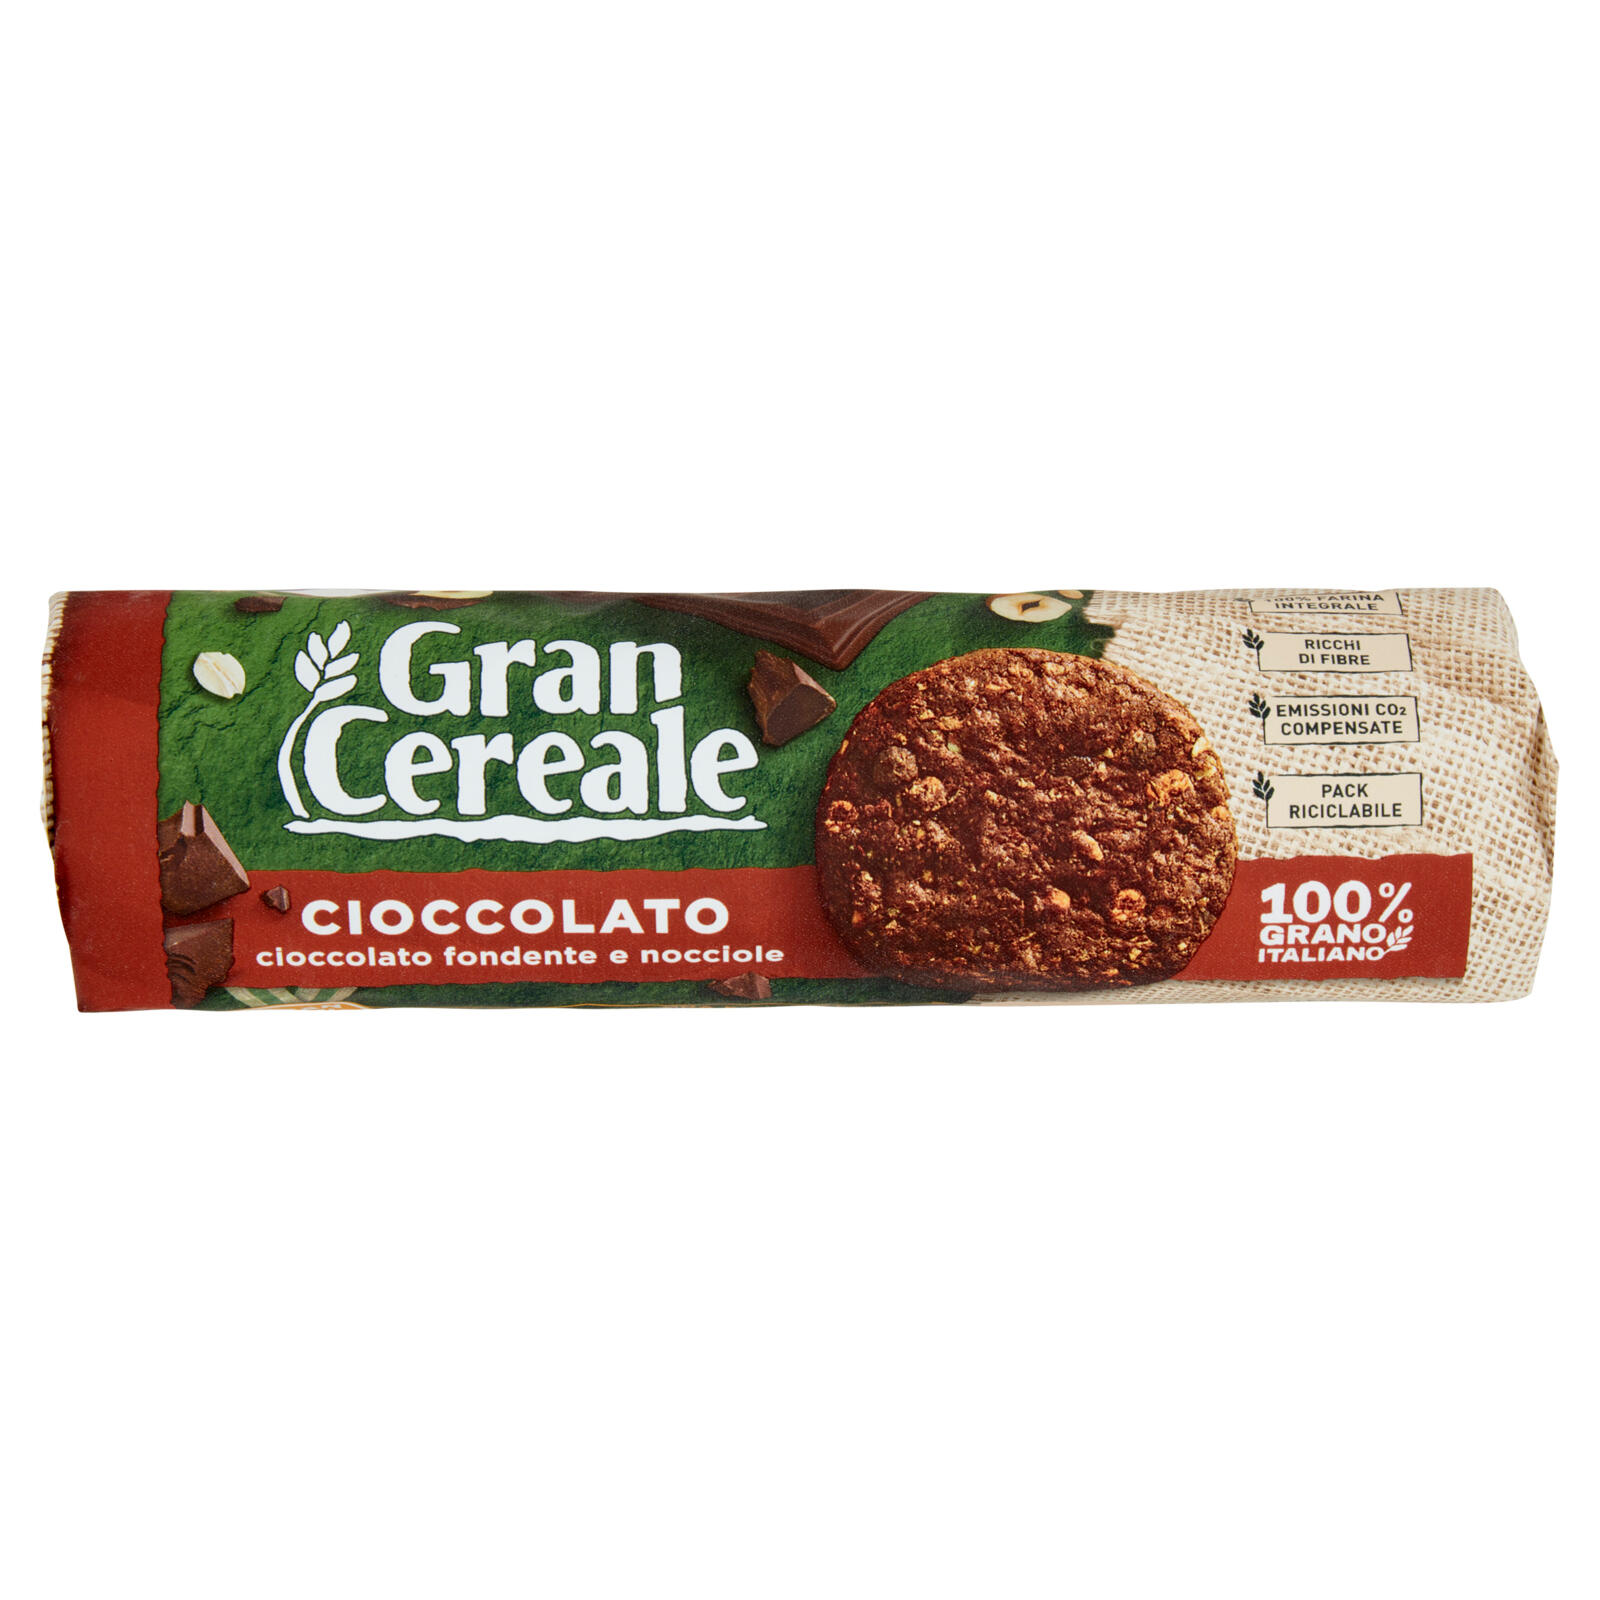 Gran Cereale Chocolate Cookies with Dark Chocolate and Hazelnuts Tube 230g